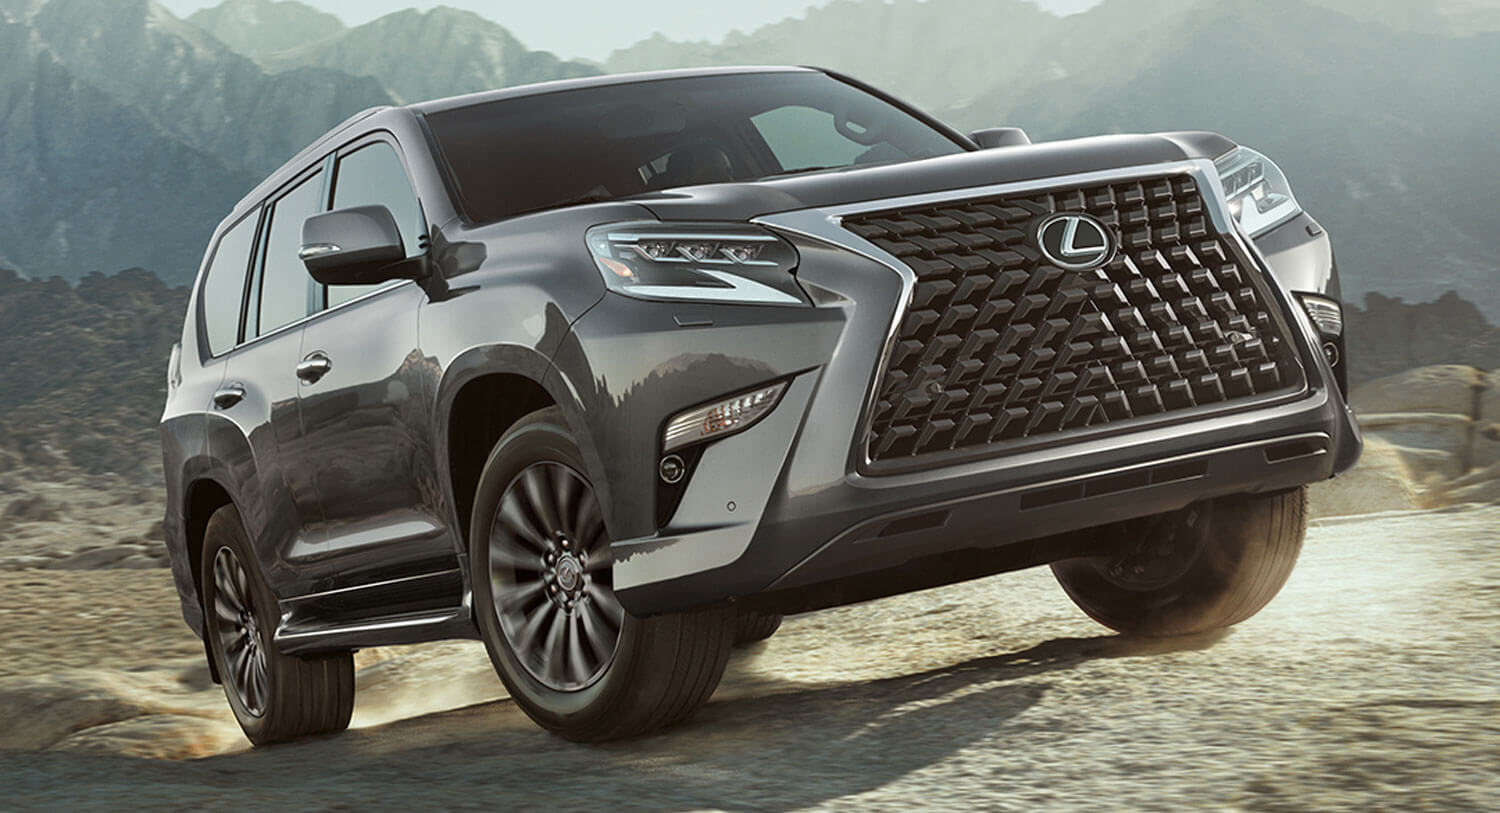 Lexus Admits Its Giant Grilles Gross Out Buyers